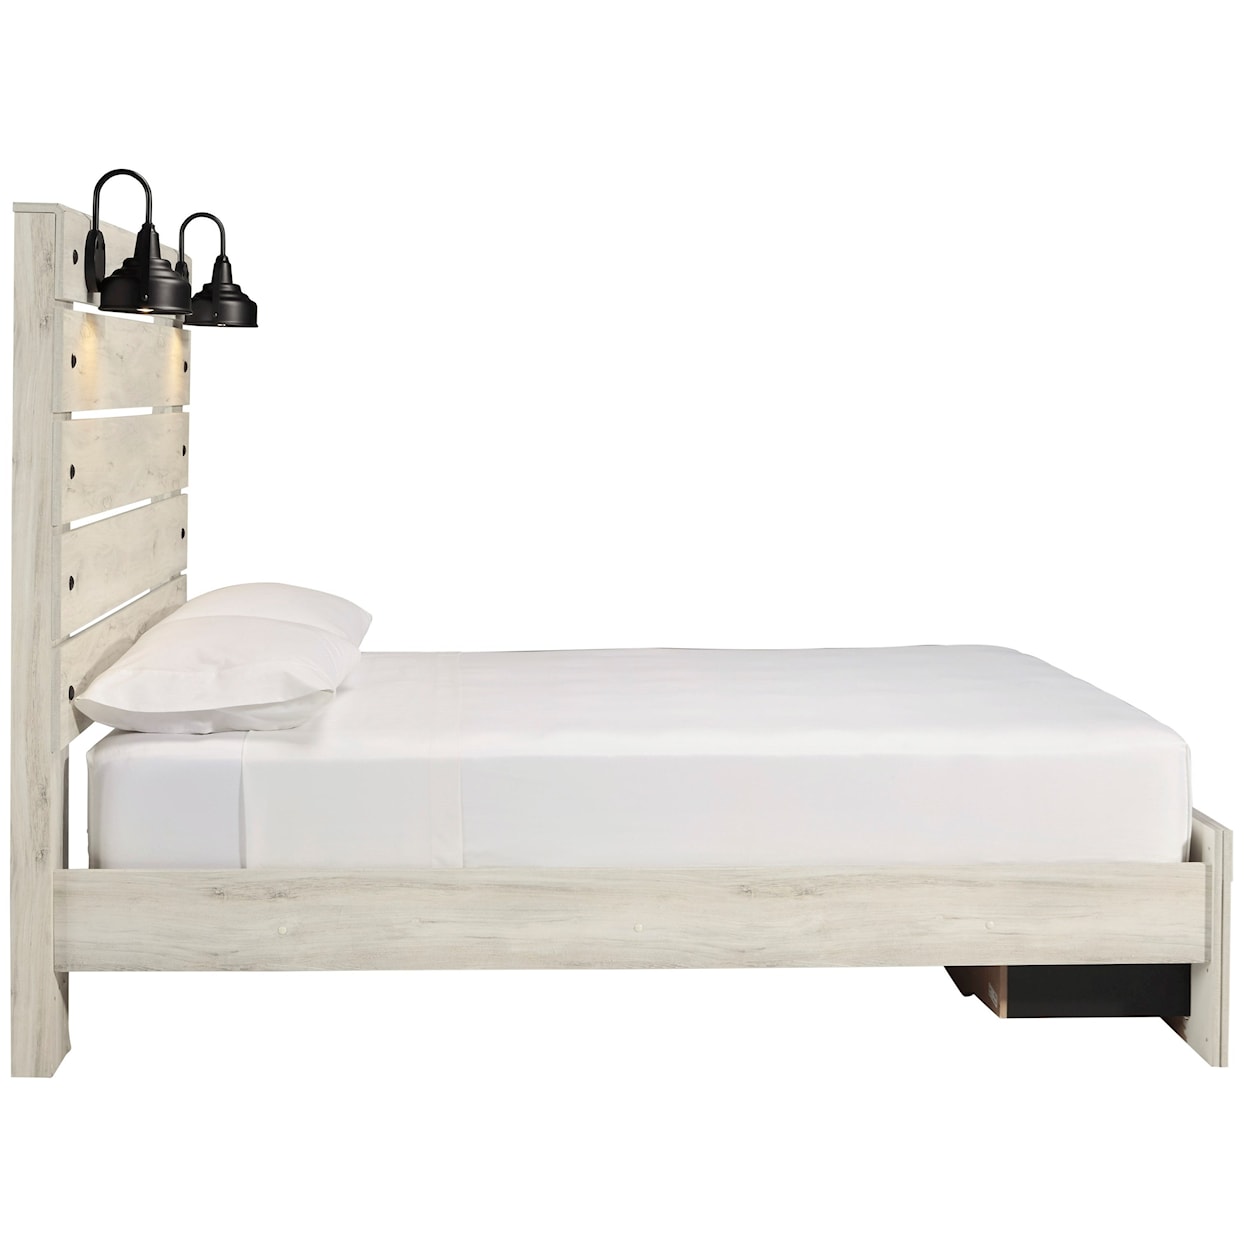 Ashley Signature Design Cambeck Queen Bed w/ Lights & Footboard Drawers